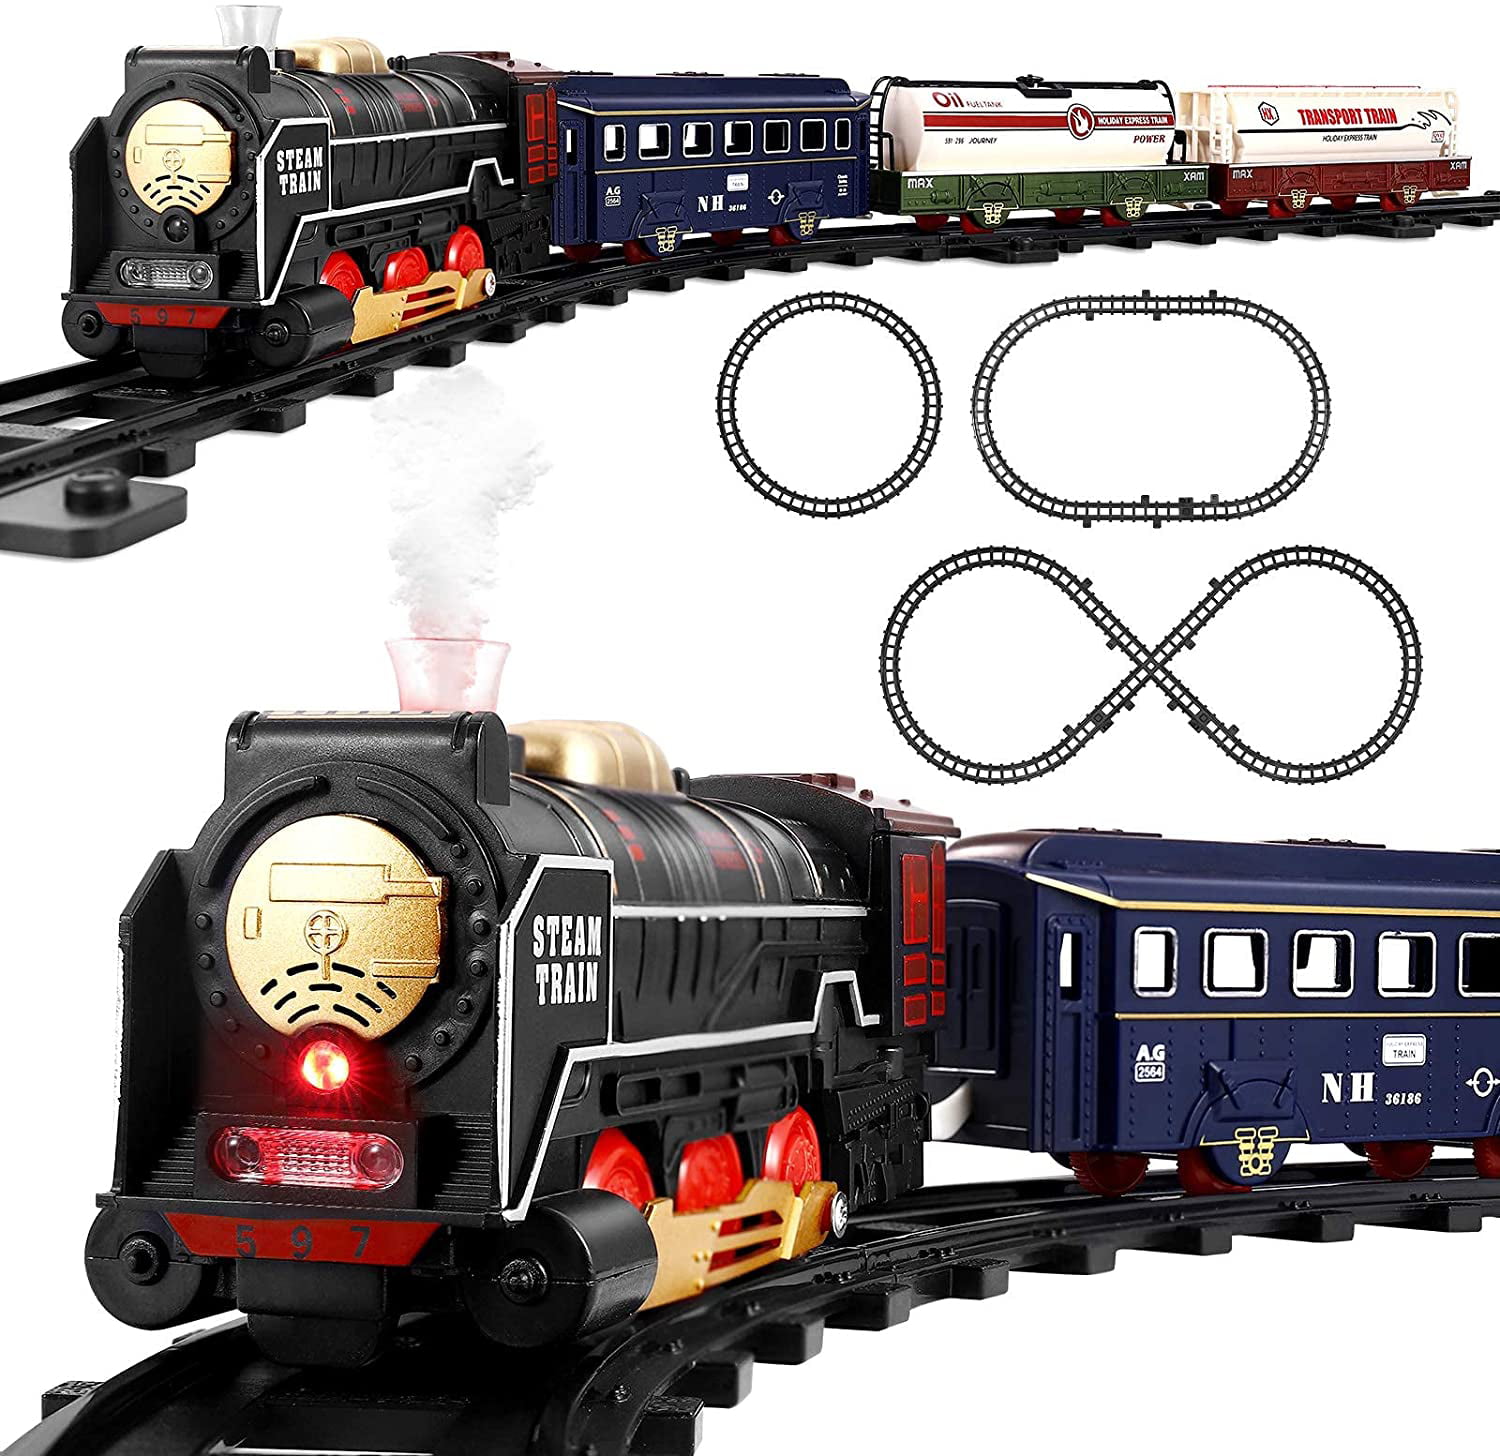 Simulated Sound and Light for 3+ Children Classic Parts Fniise Battery-Powered Electric Model Train Set --270 cm Long Track Circumference Scene Accessories